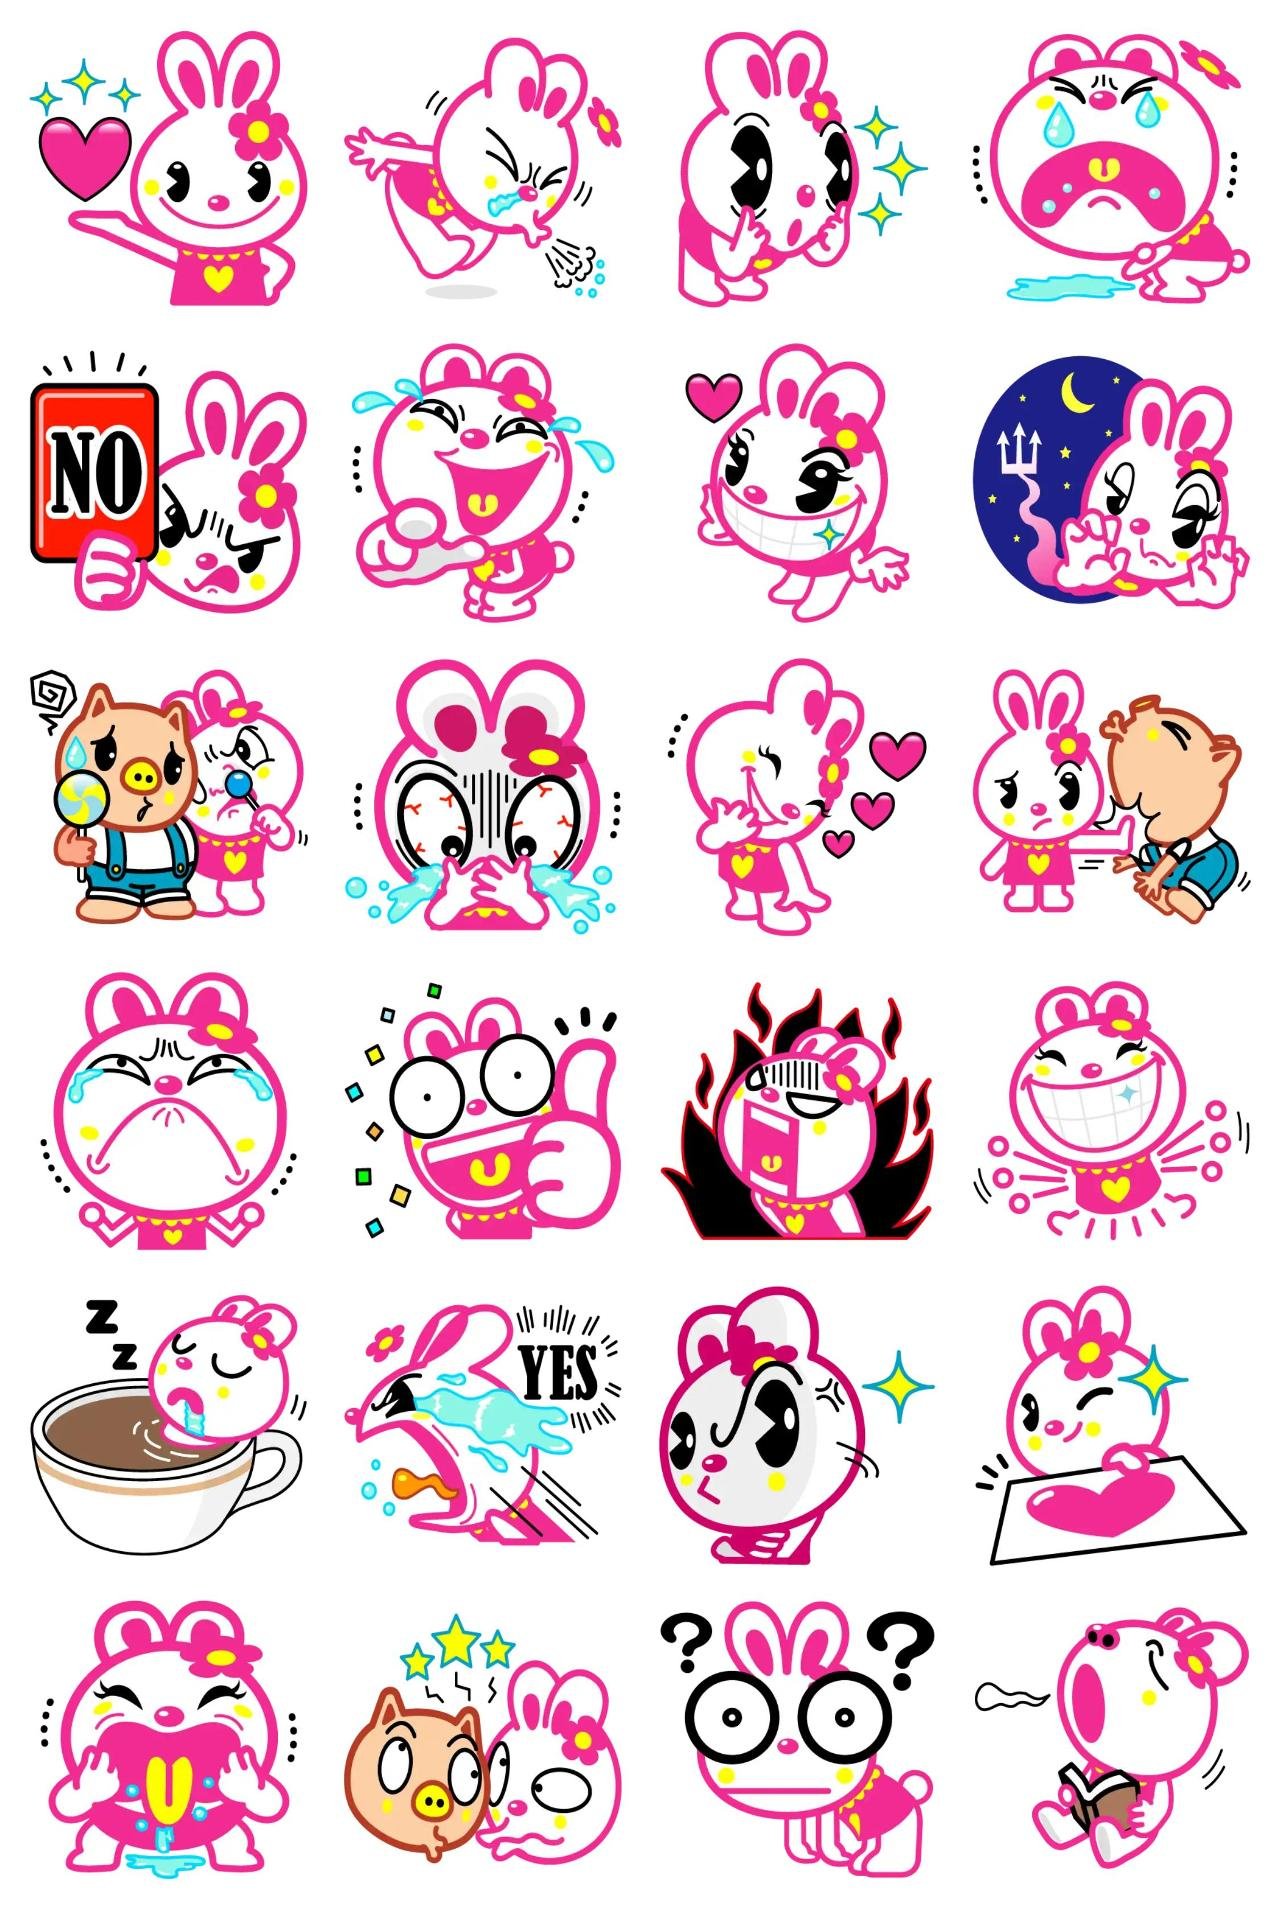 Positive Rabbit Hipani 6 Animals sticker pack for Whatsapp, Telegram, Signal, and others chatting and message apps